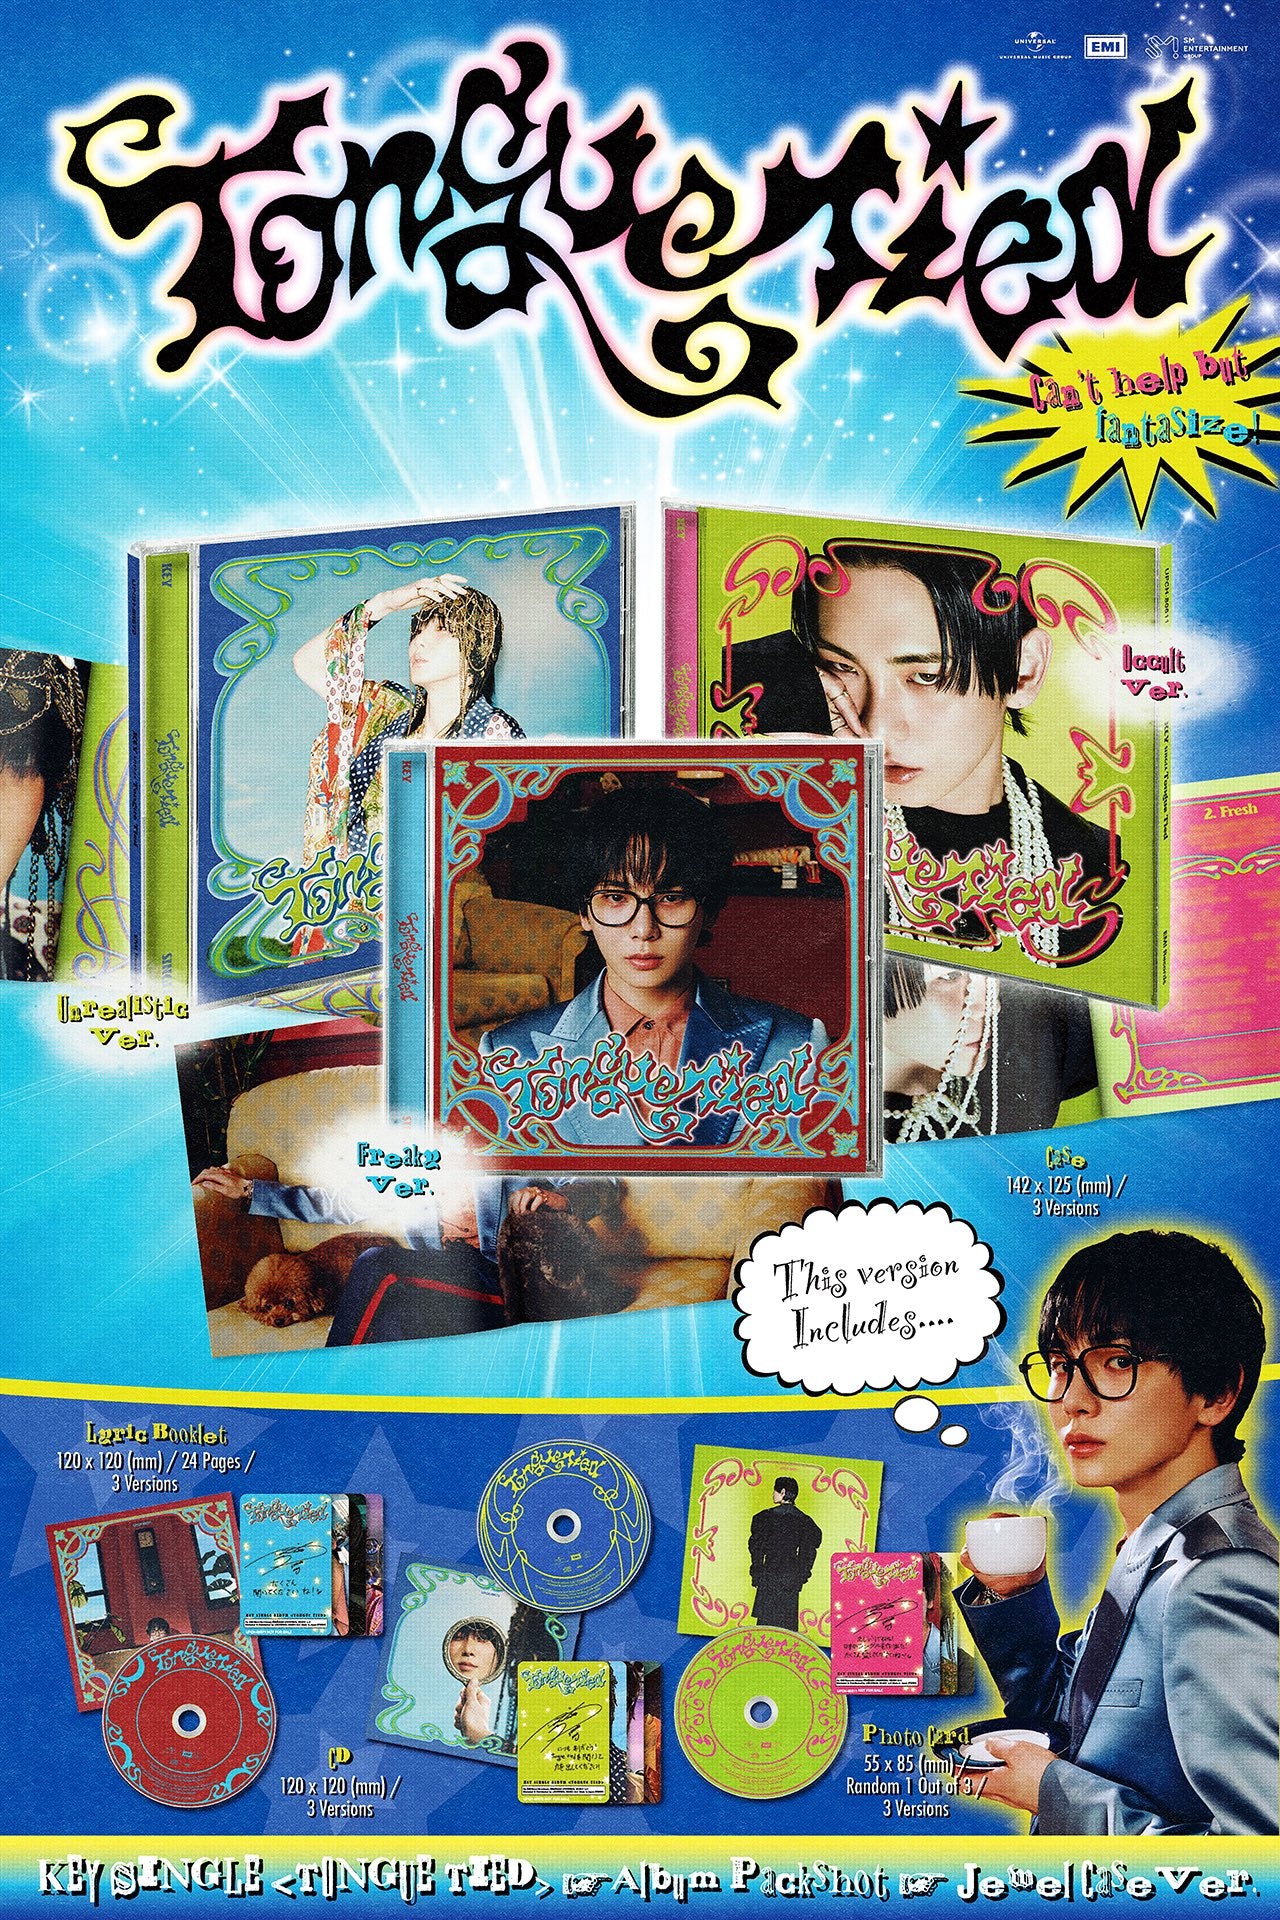 [PRE ORDER] KEY  - [TONGUE TIED] (Limited / FREAKY Ver.)